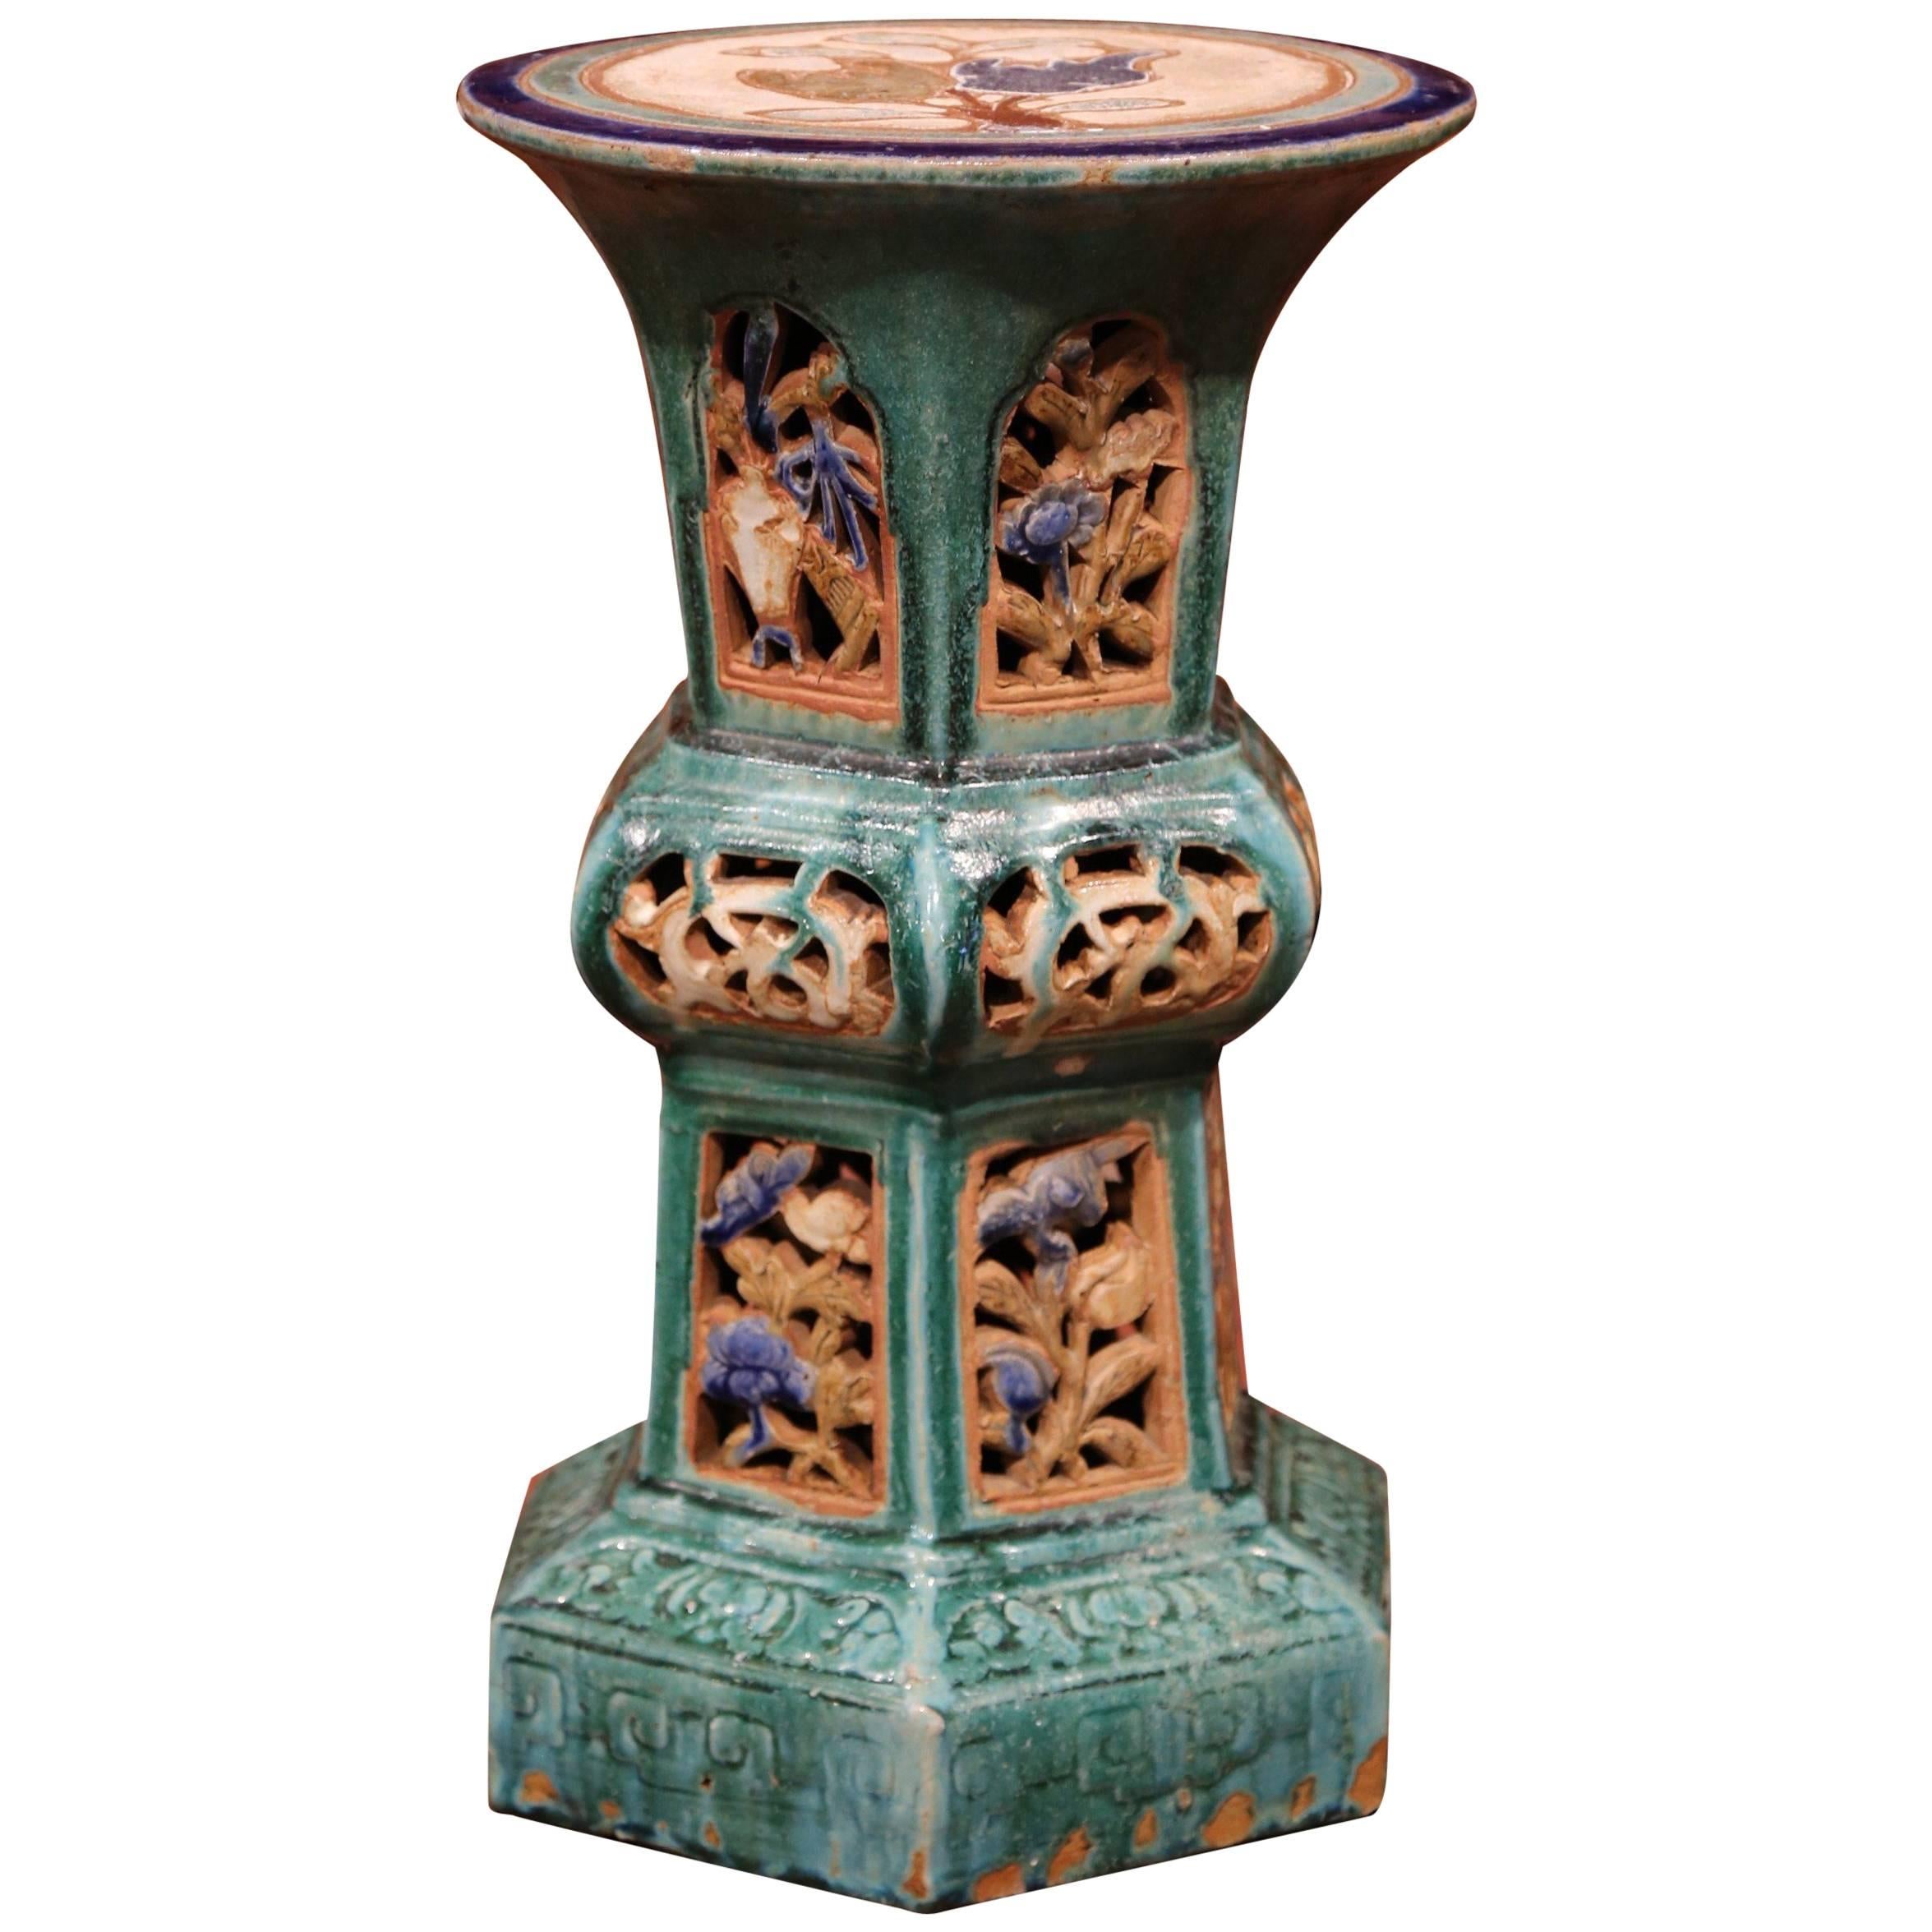 Early 20th Century French Hand Painted Glazed Ceramic Garden Stool